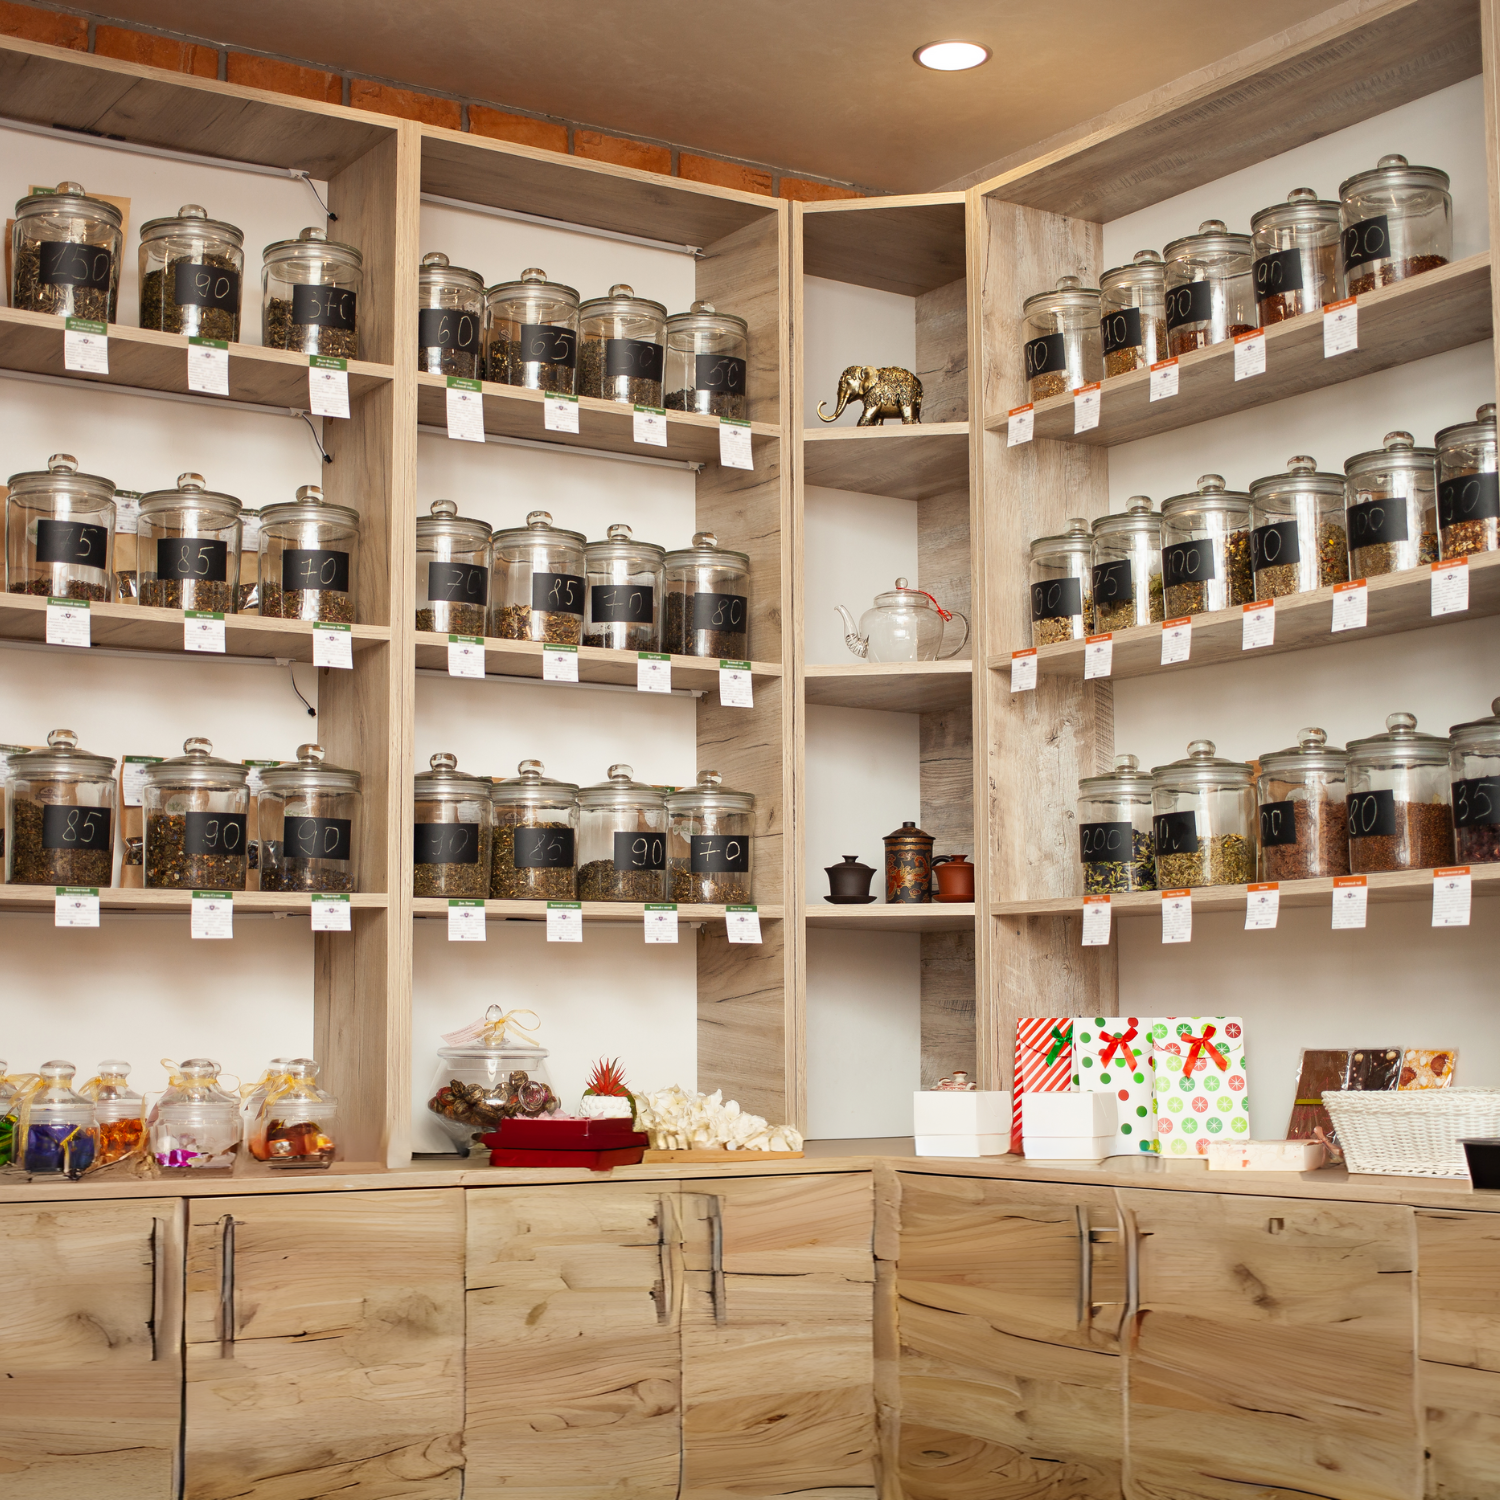 A cozy tea shop interior with natural wood shelves filled with clear glass jars of various loose leaf teas. The shelves are well-stocked with Sacred Plant Co Wholesale Tea, reflecting a warm and inviting ambiance.